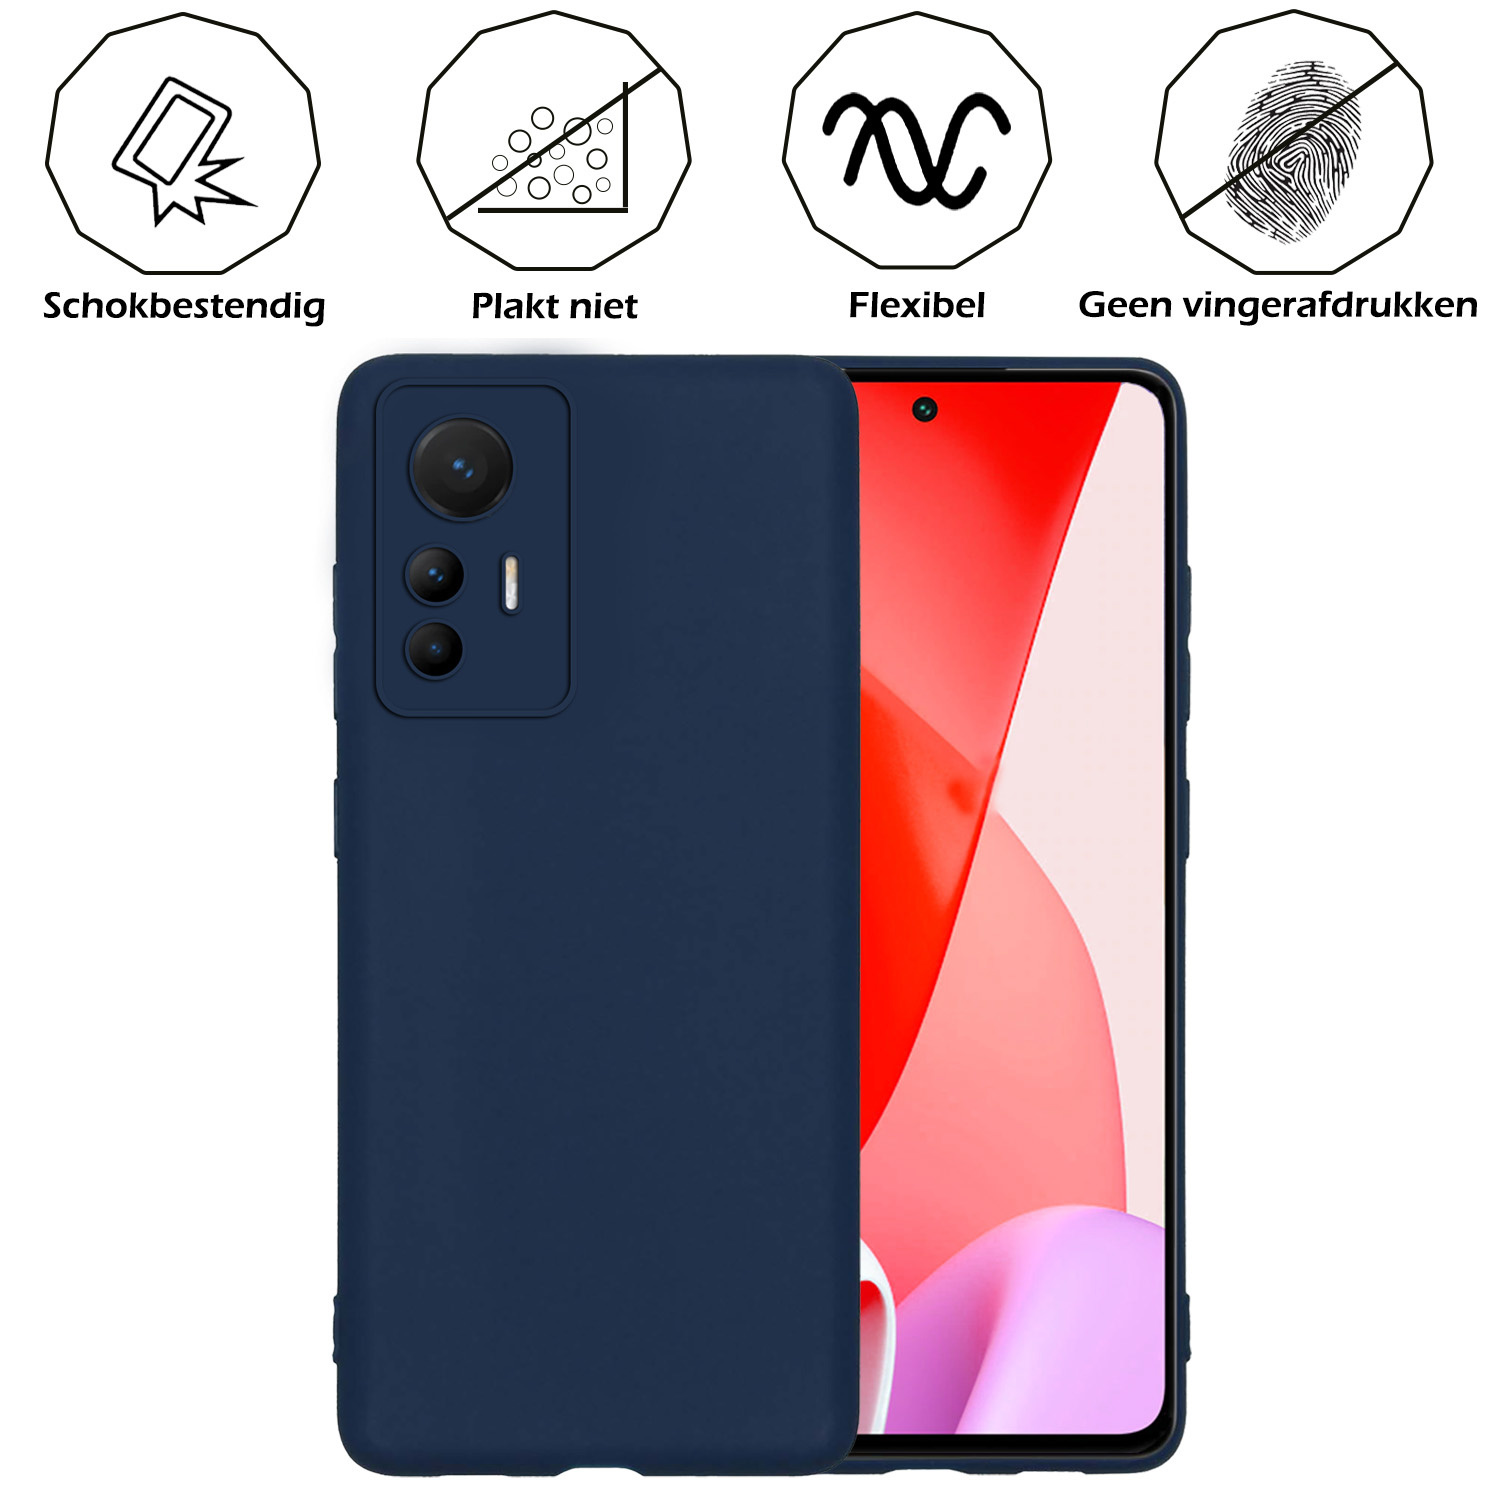 Nomfy Xiaomi 12 Lite Hoesje Siliconen Case Back Cover Met 2x Screenprotector - Xiaomi 12 Lite Hoes Cover Silicone - Donker Blauw